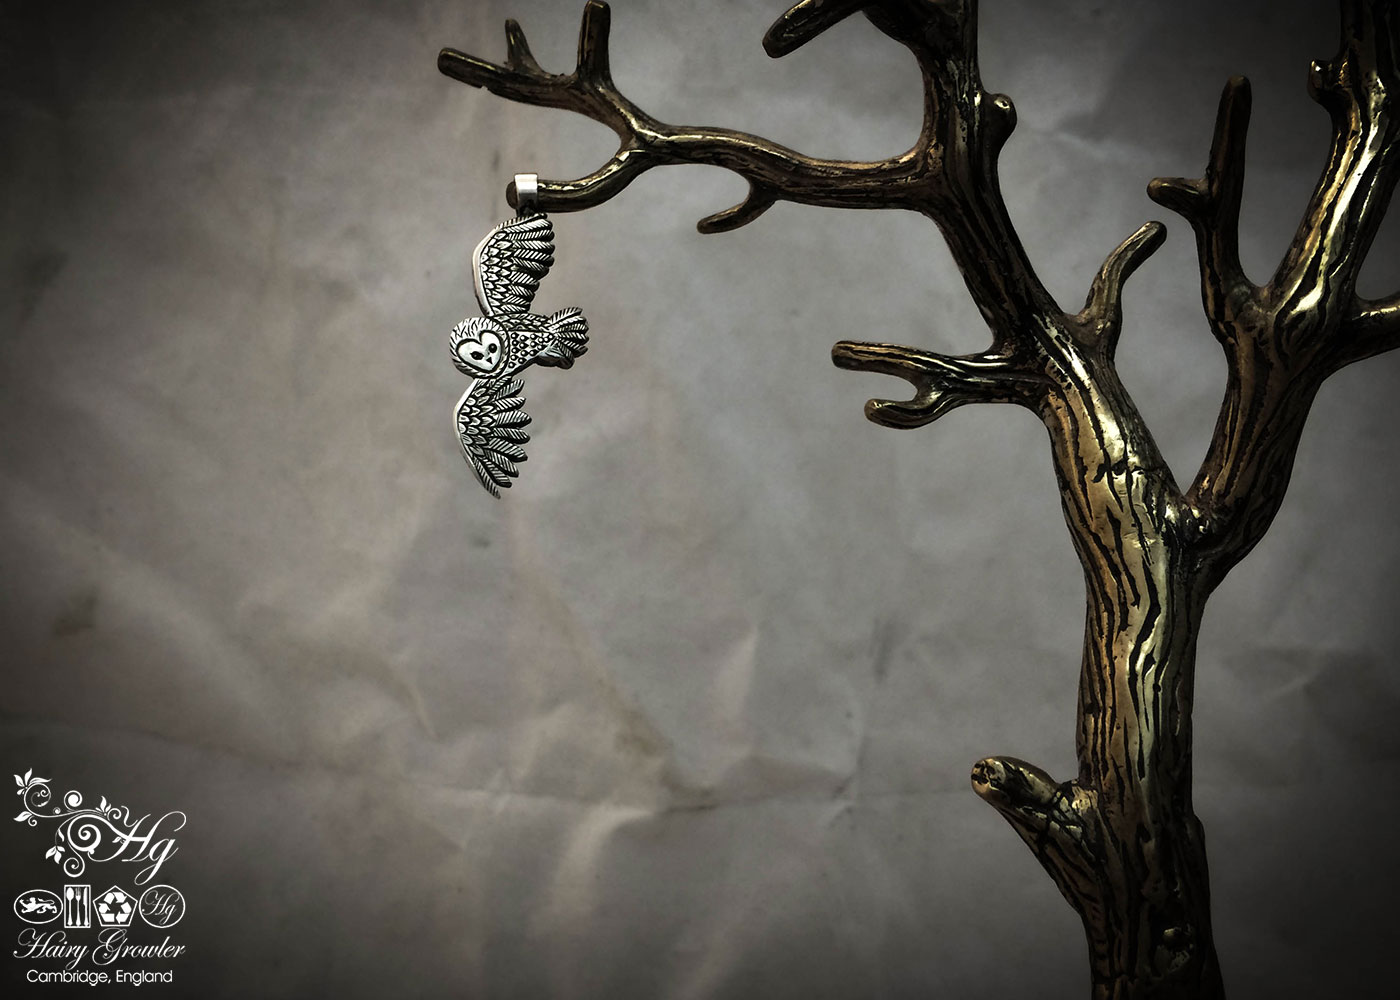 handmade and recycled silver coins flying playful owl charm for a tree sculpture, necklace or bracelet